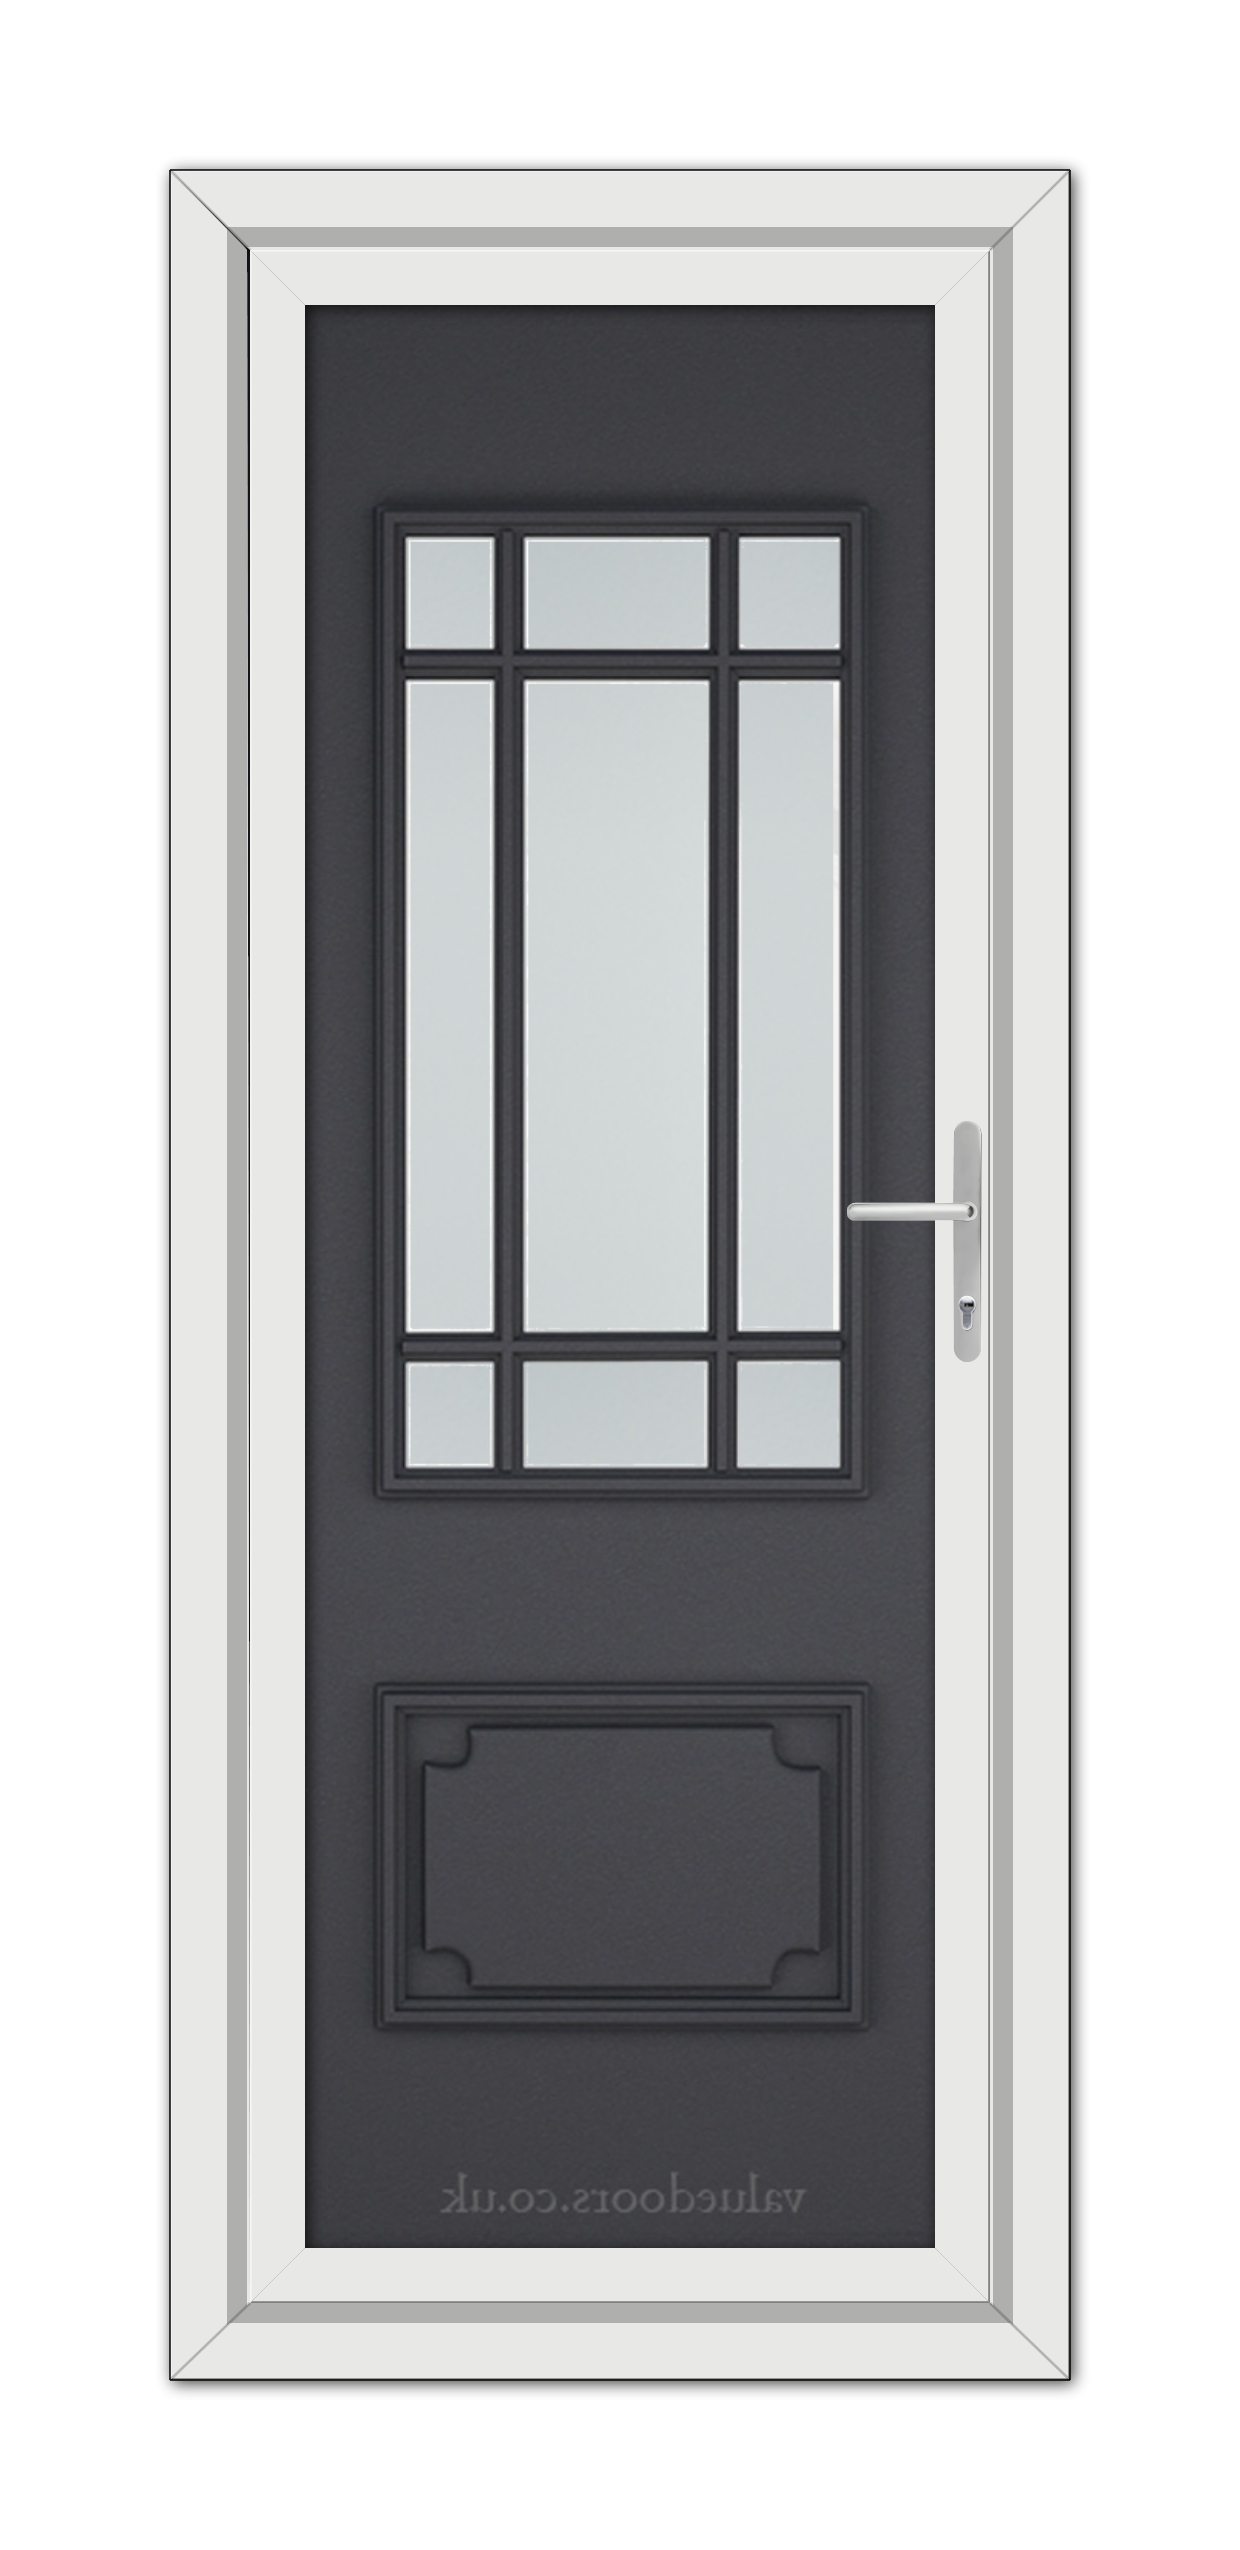 Vertical image of a modern Grey Grained Seville uPVC Door with a rectangular glass window at the top and a decorative panel at the bottom, framed by a white casing.